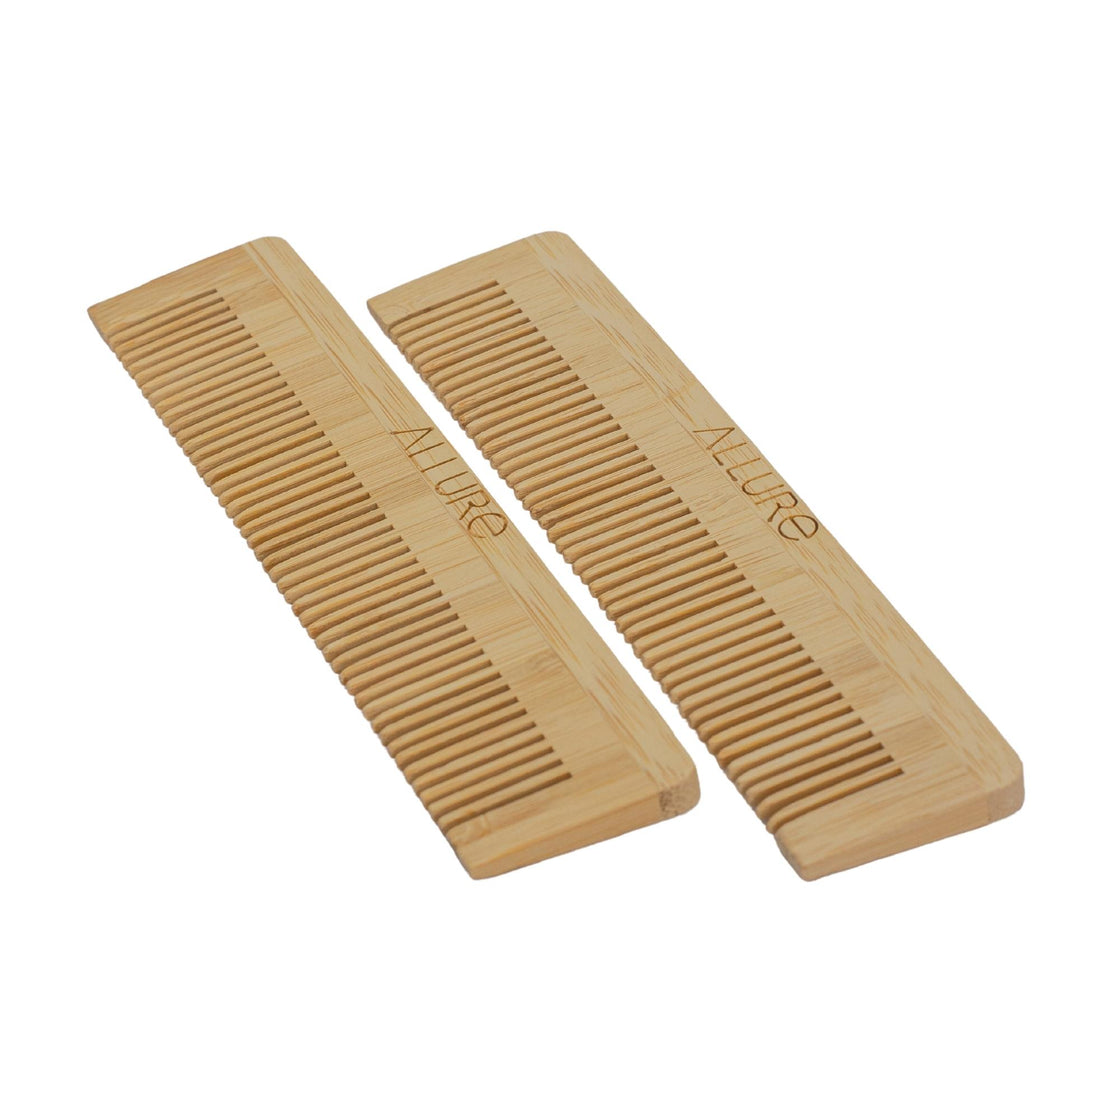 Allure Neem Wood Bamboo Pocket Hair Combs (CB-01 Pack of 2)